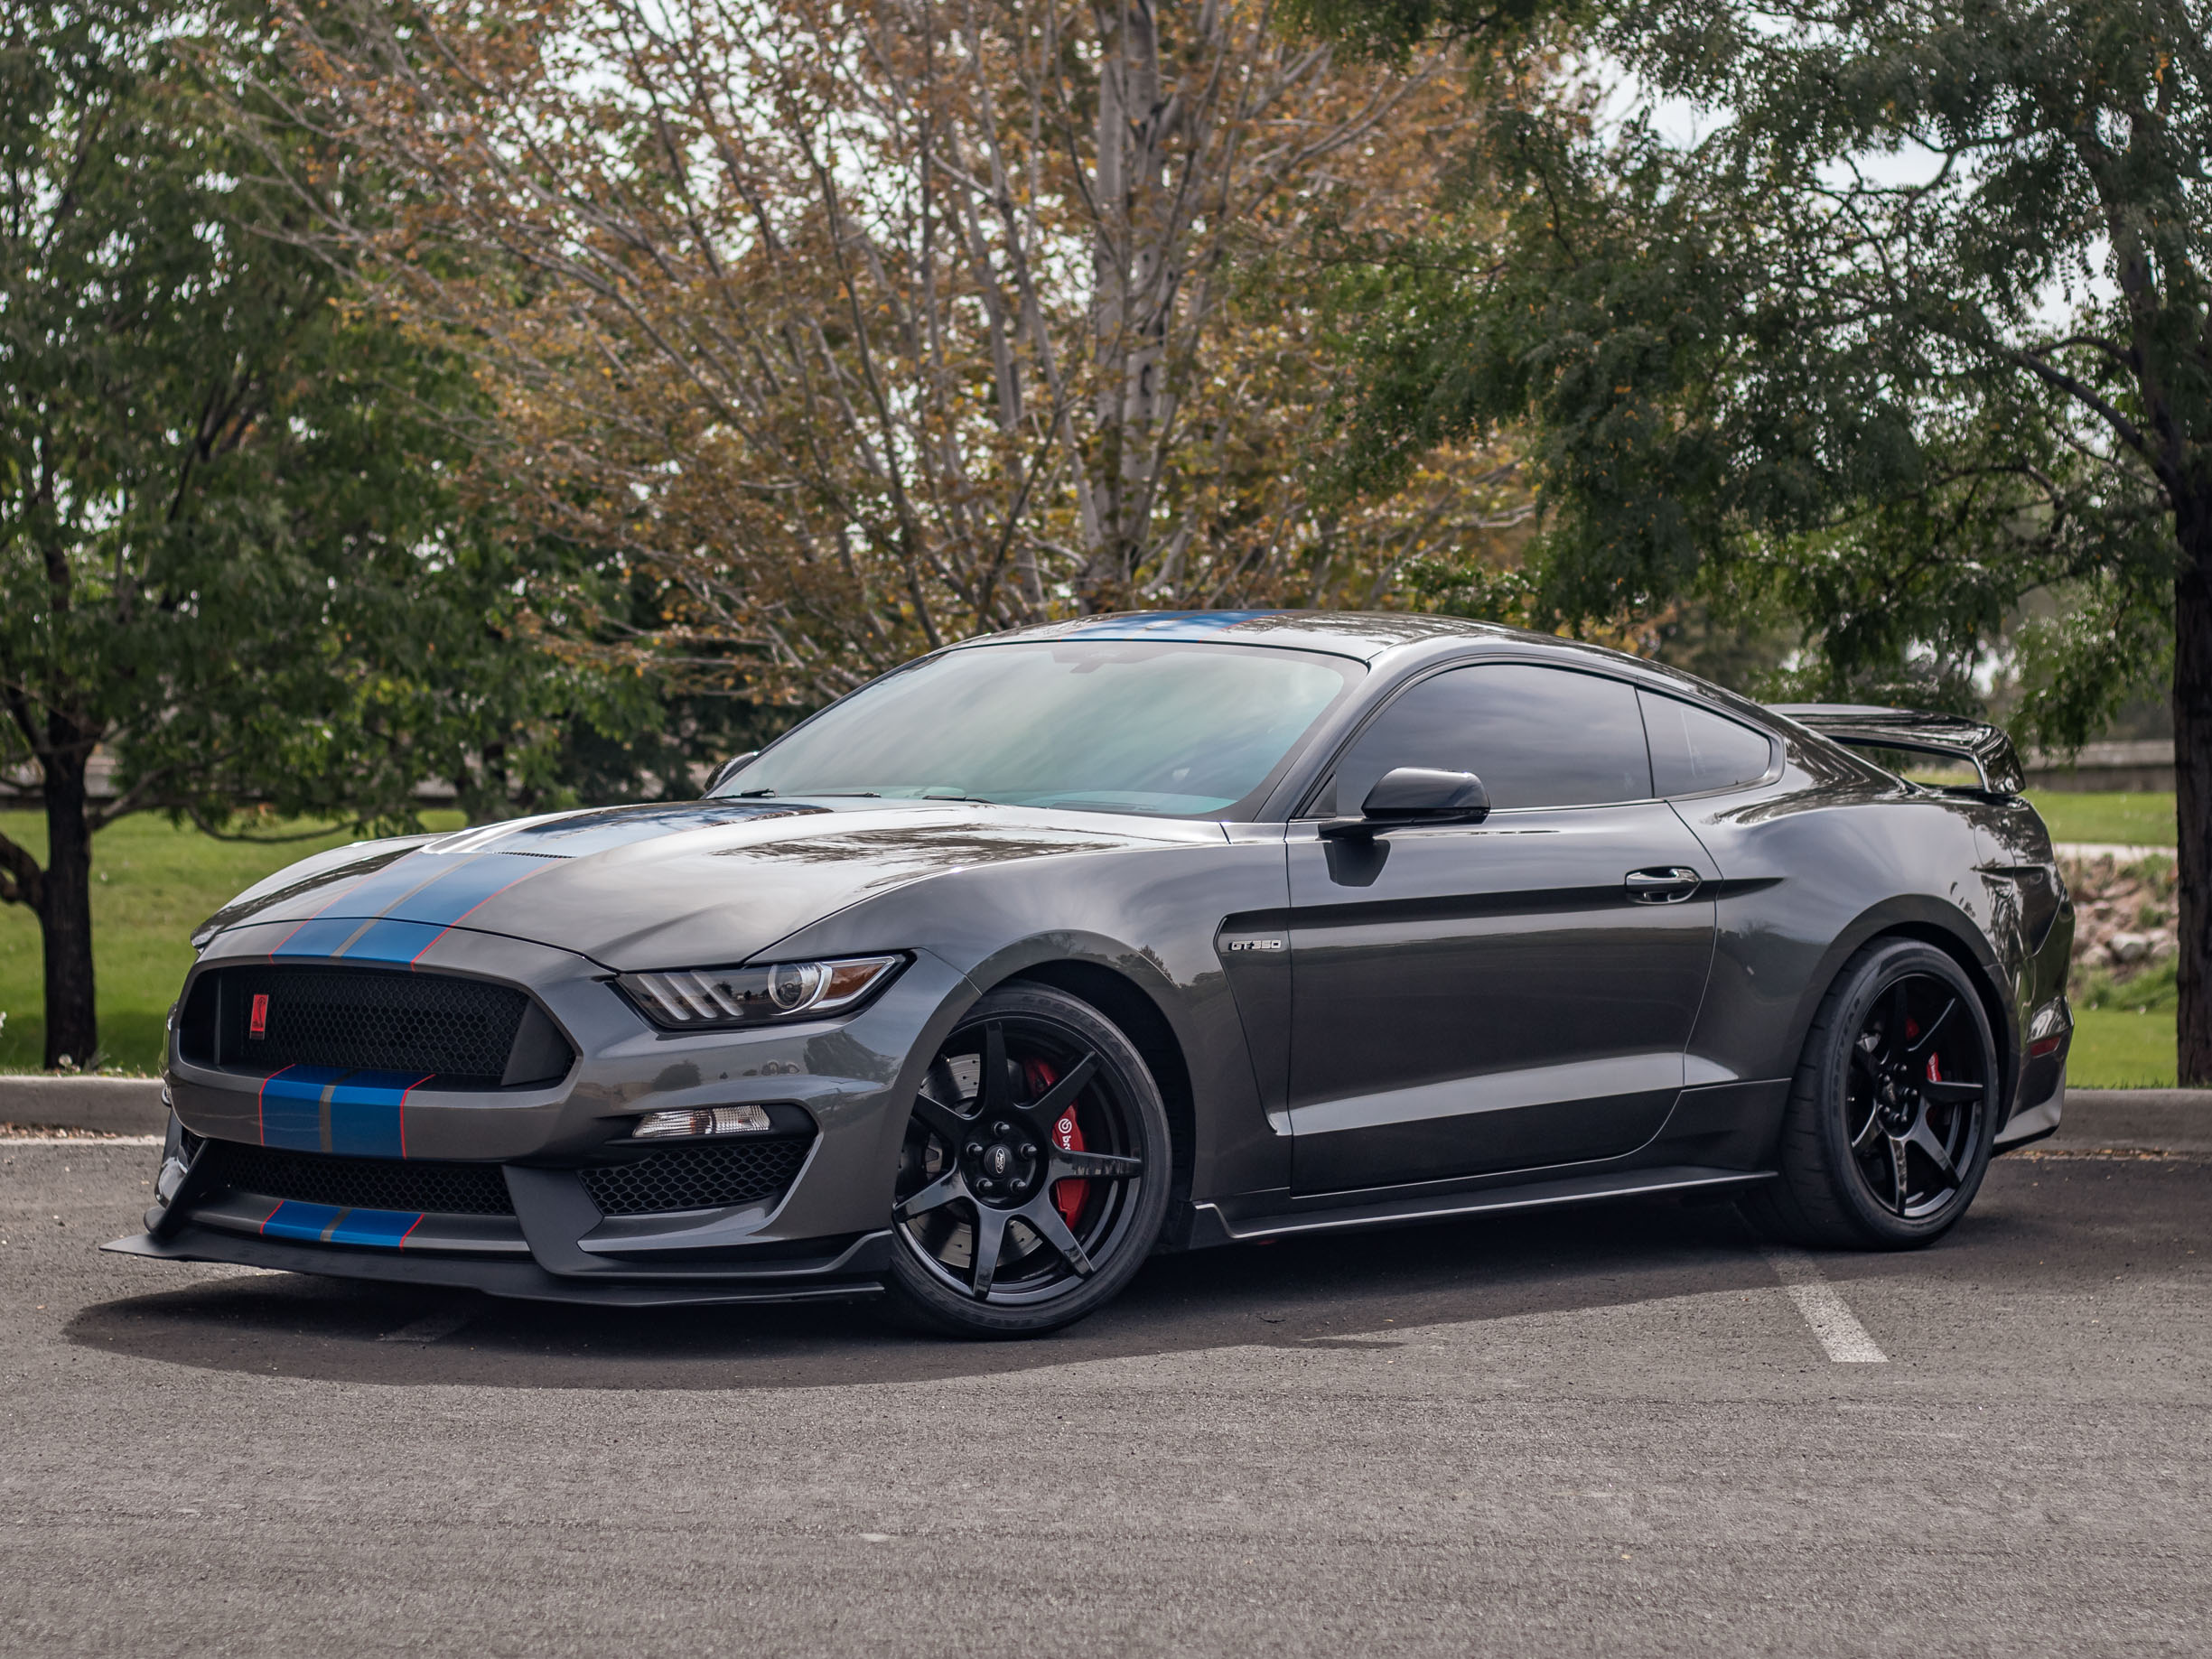 Mustang Of The Day: 2017 Ford Mustang Shelby GT350R